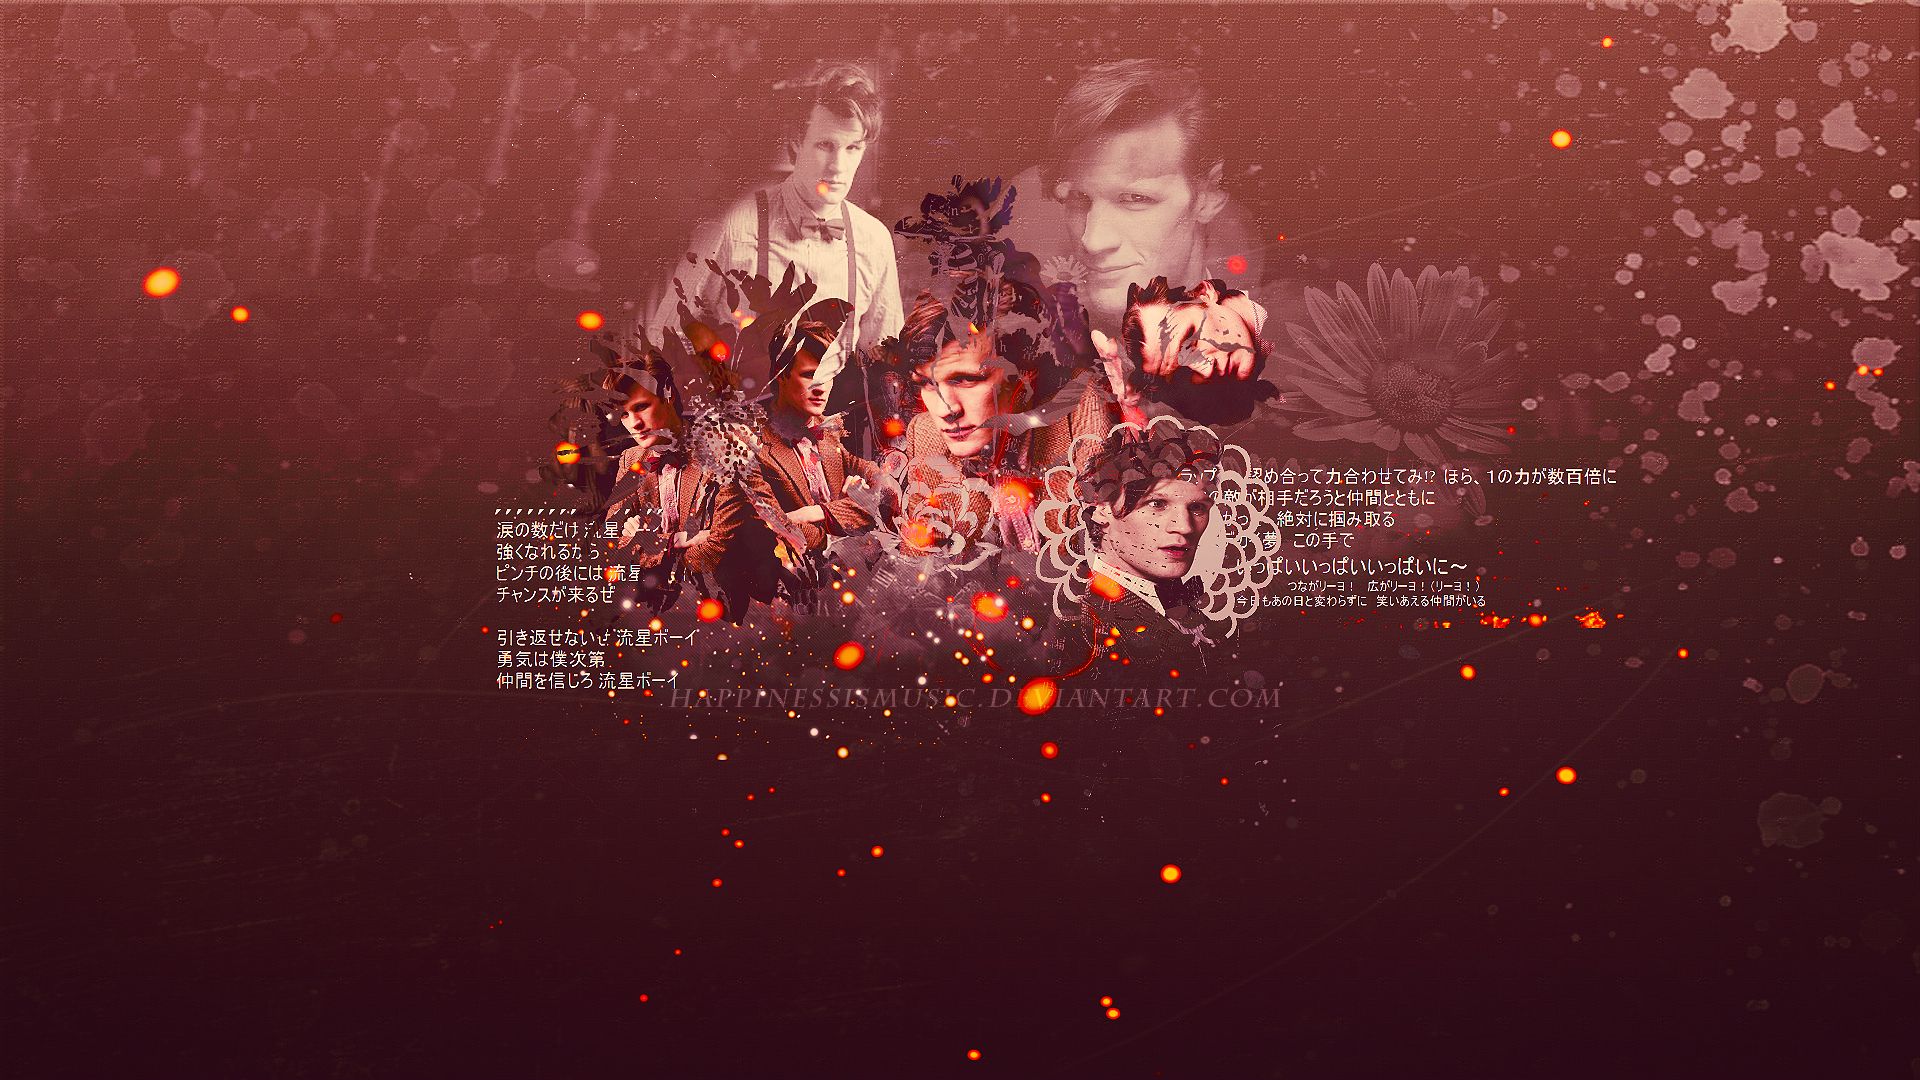 Matt Smith as the doctor wallpaper by HappinessIsMusic on DeviantArt